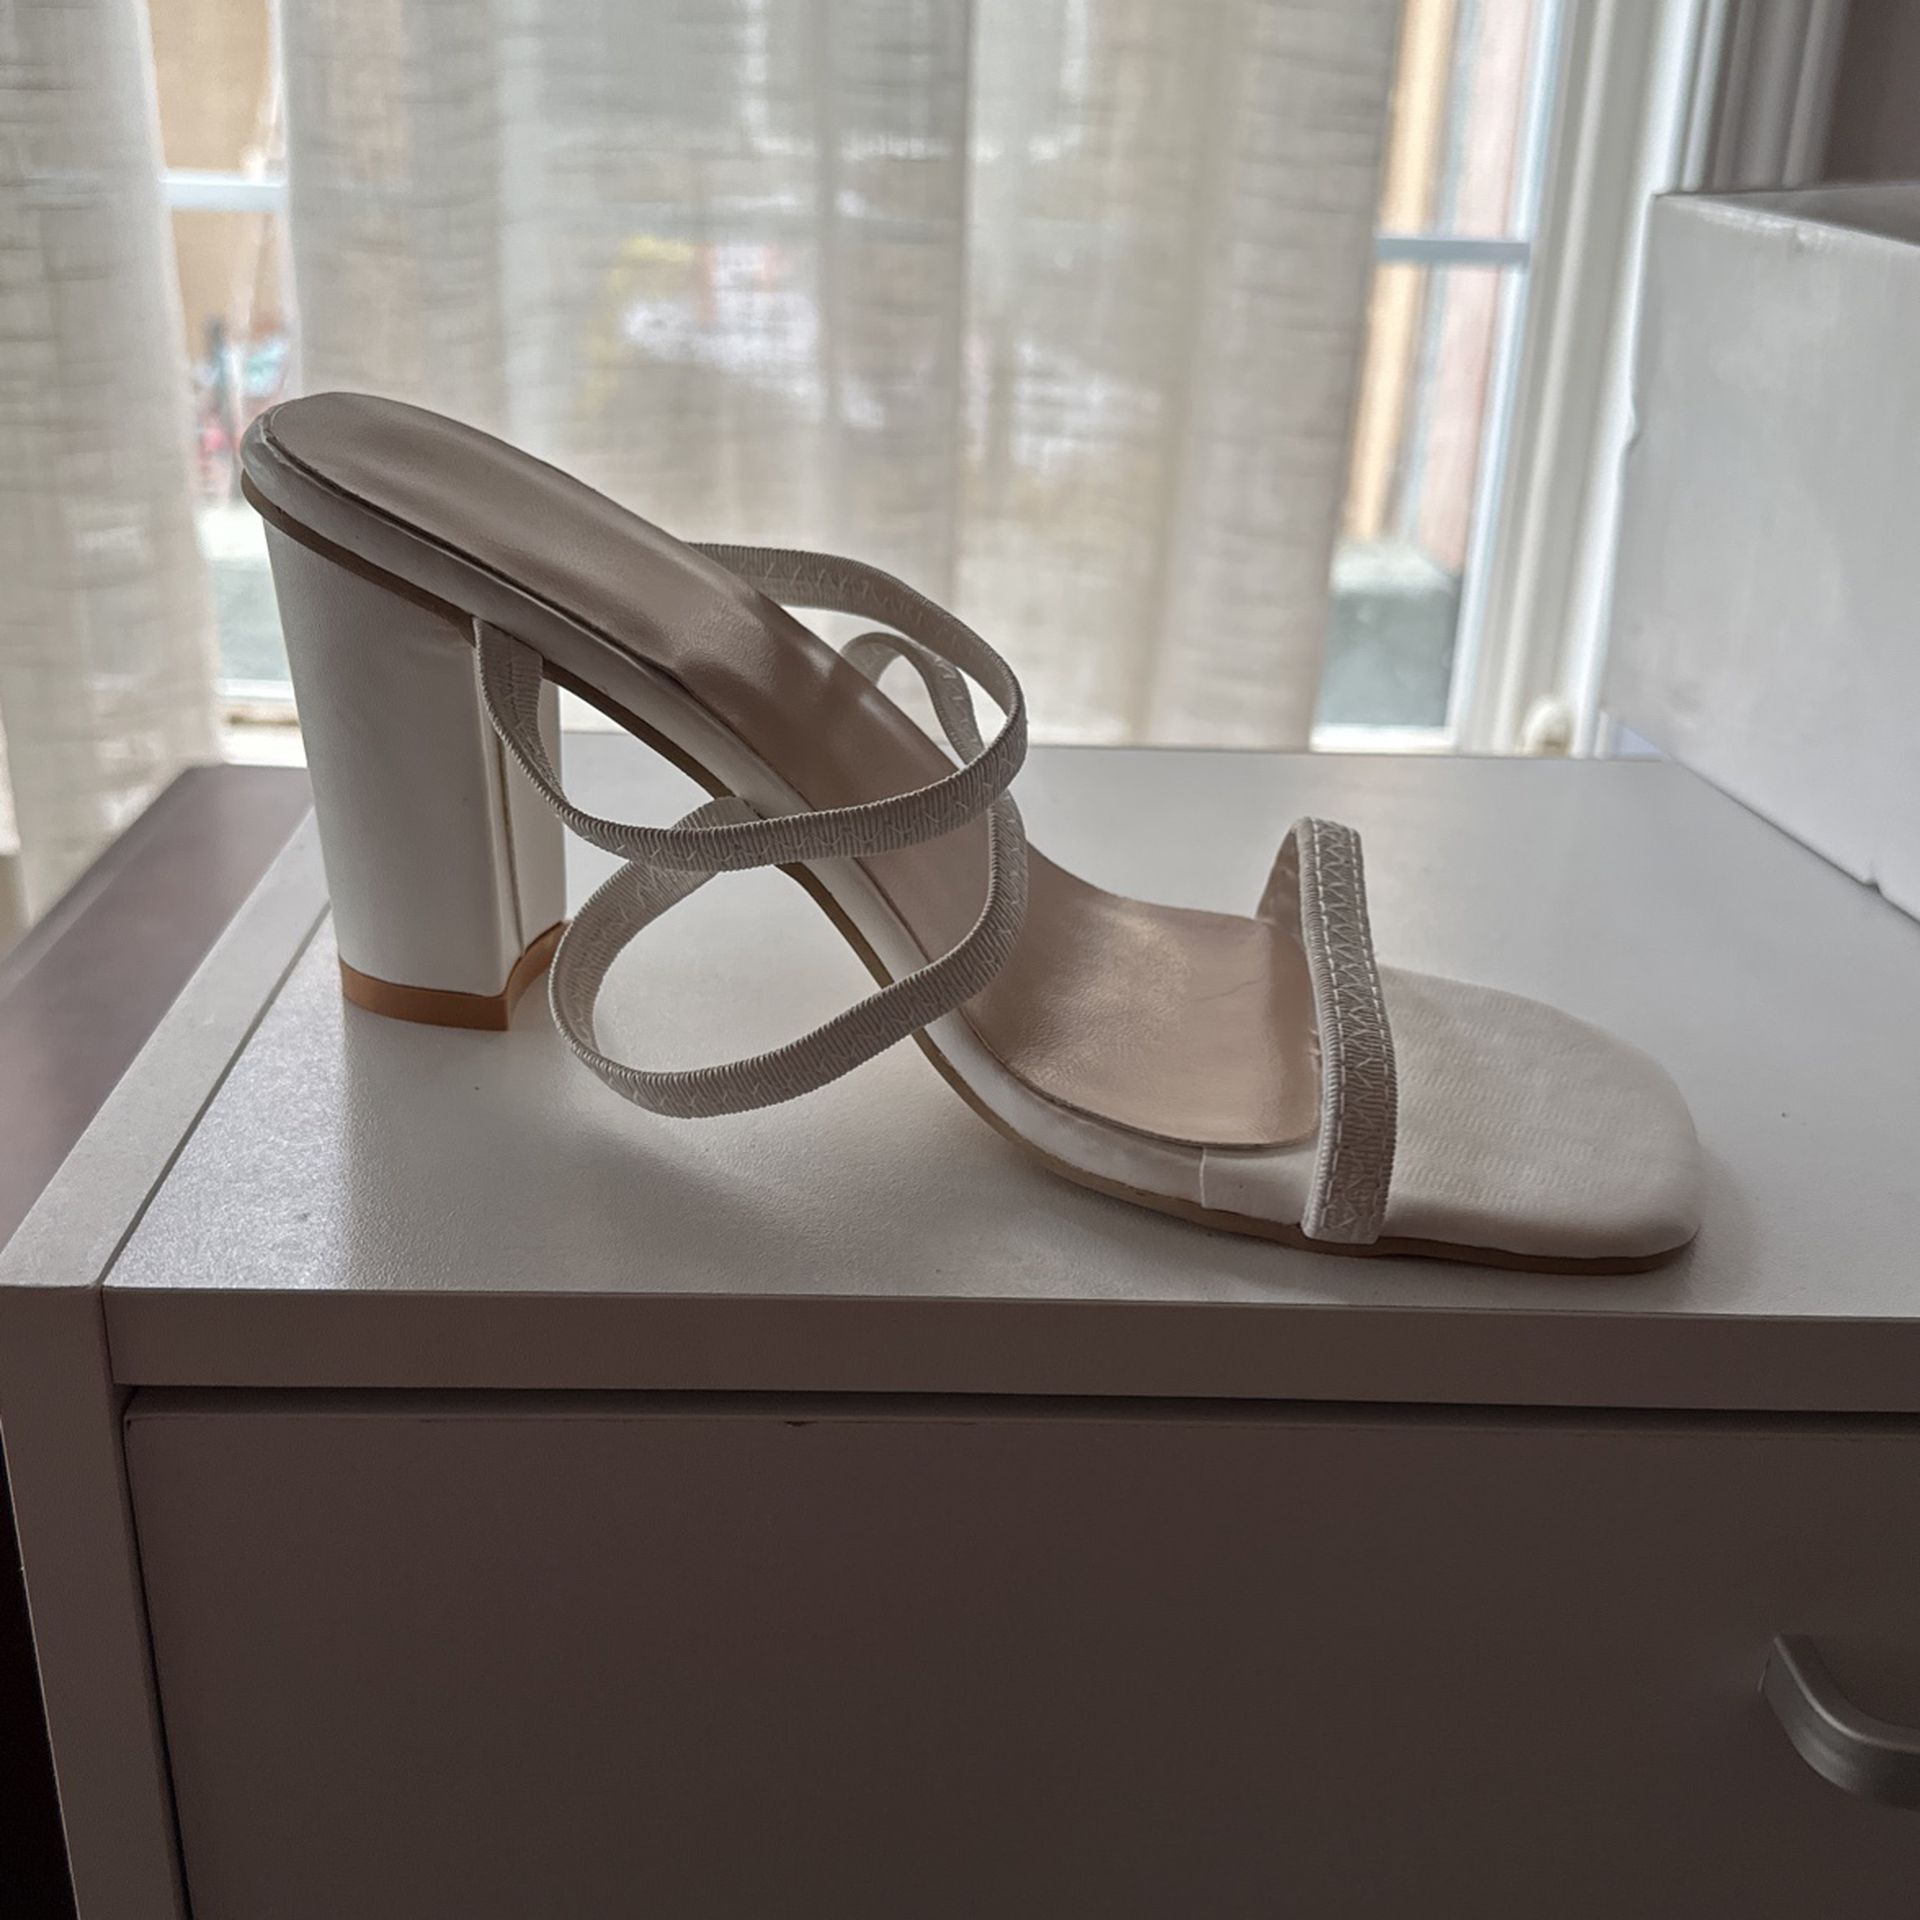 Original Chanel shoes for Sale in Diamond Bar, CA - OfferUp